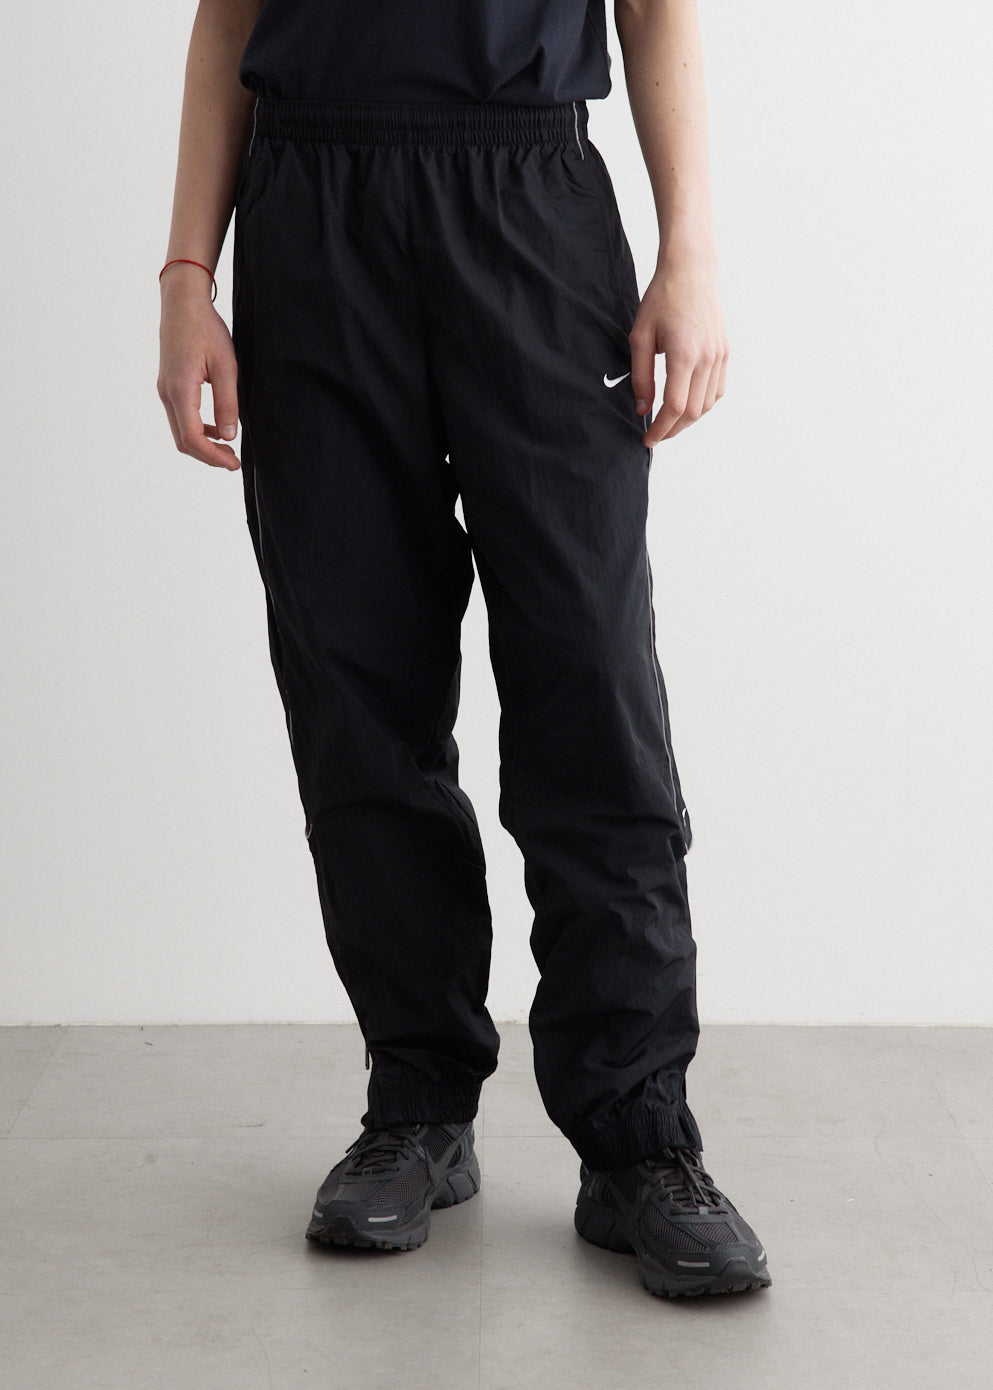 Men's Pants and Sweats | Performance, Comfort and Style | Stirling Sports